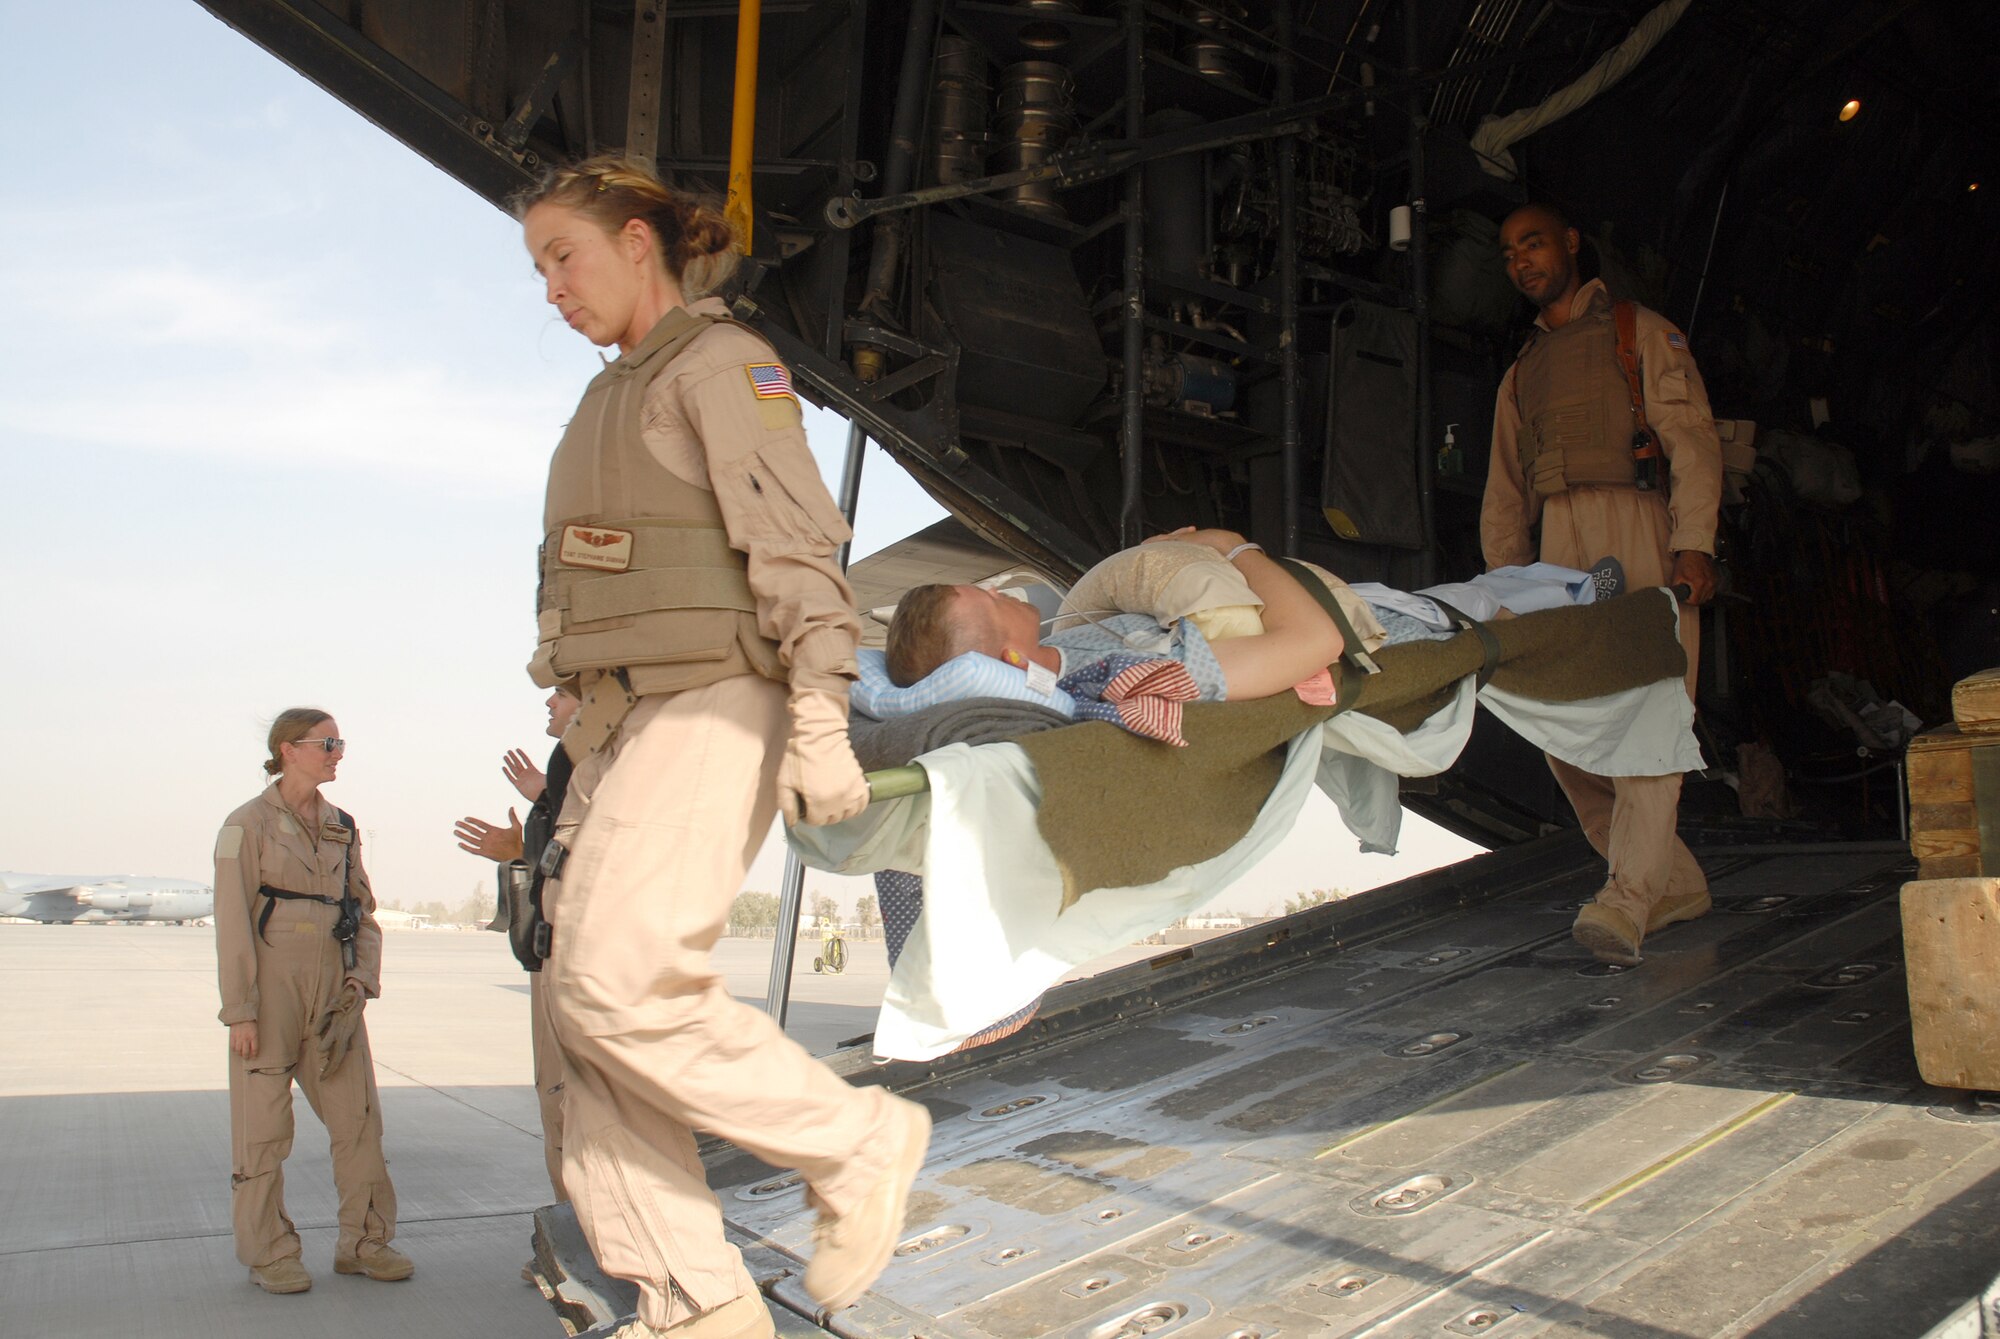 SOUTHWEST ASIA - Tech. Sgts. Stephanie Durham and Ricardo Brown carry a patient from a C-130 Hercules on a litter Oct. 14. Sergeant Durham, from Panama City, Fla, is deployed to Southwest Asia from Pope Air Force Base, N.C. Sergeant Brown, from Wichita Falls, Texas, is deployed from Scott AFB, Ill.  Personnel from the 379th Expeditionary Aeromedical Evacuation Squadron work to move and treat patients throughout the Southwest Asia theatre. (U.S. Air Force photo/Staff Sgt. Douglas Olsen)